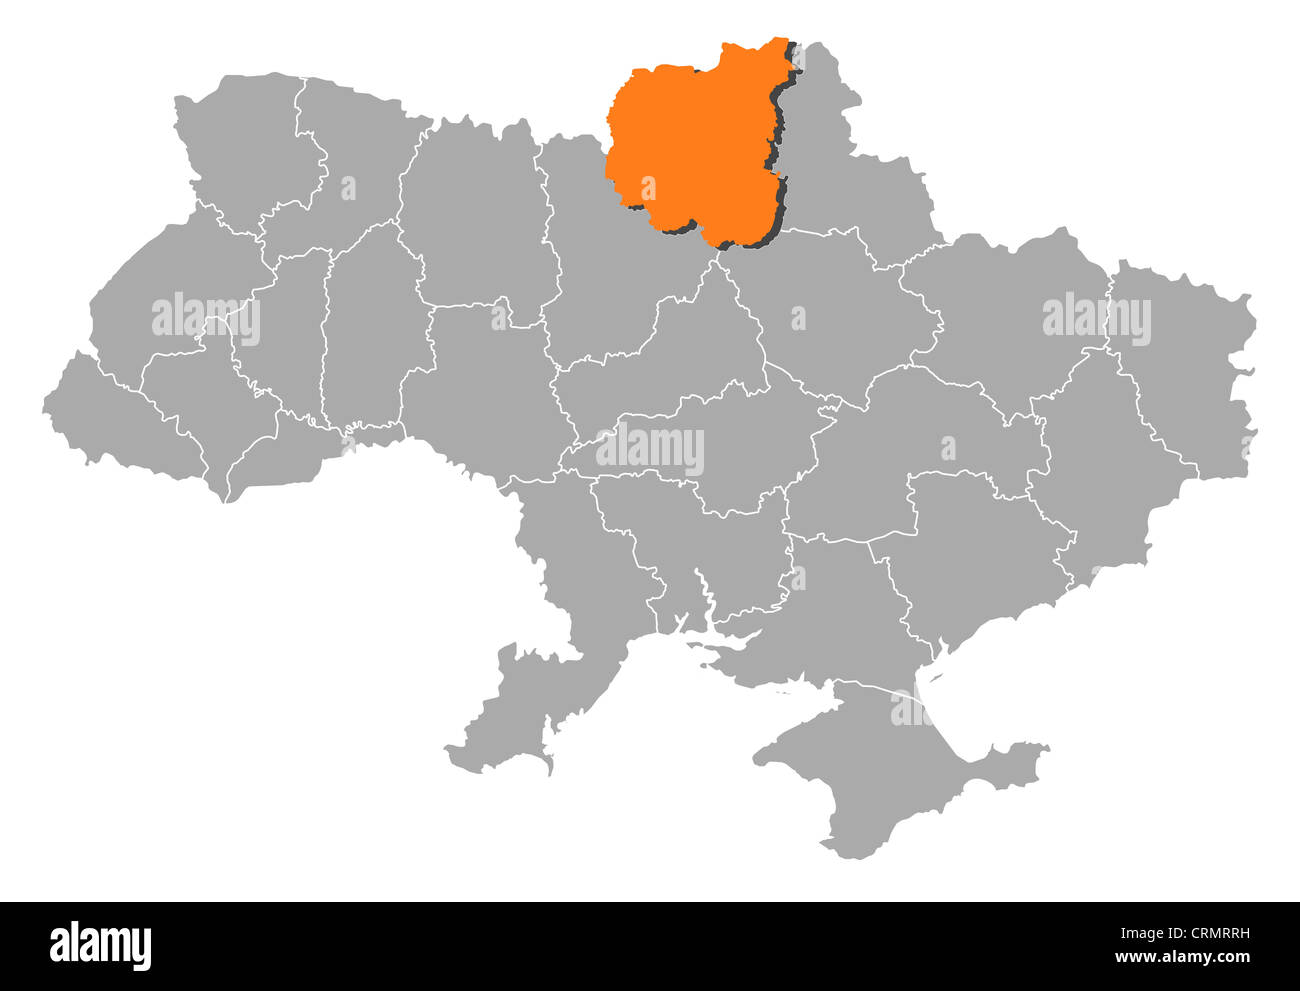 Political map of Ukraine with the several oblasts where Chernihiv is highlighted. Stock Photo